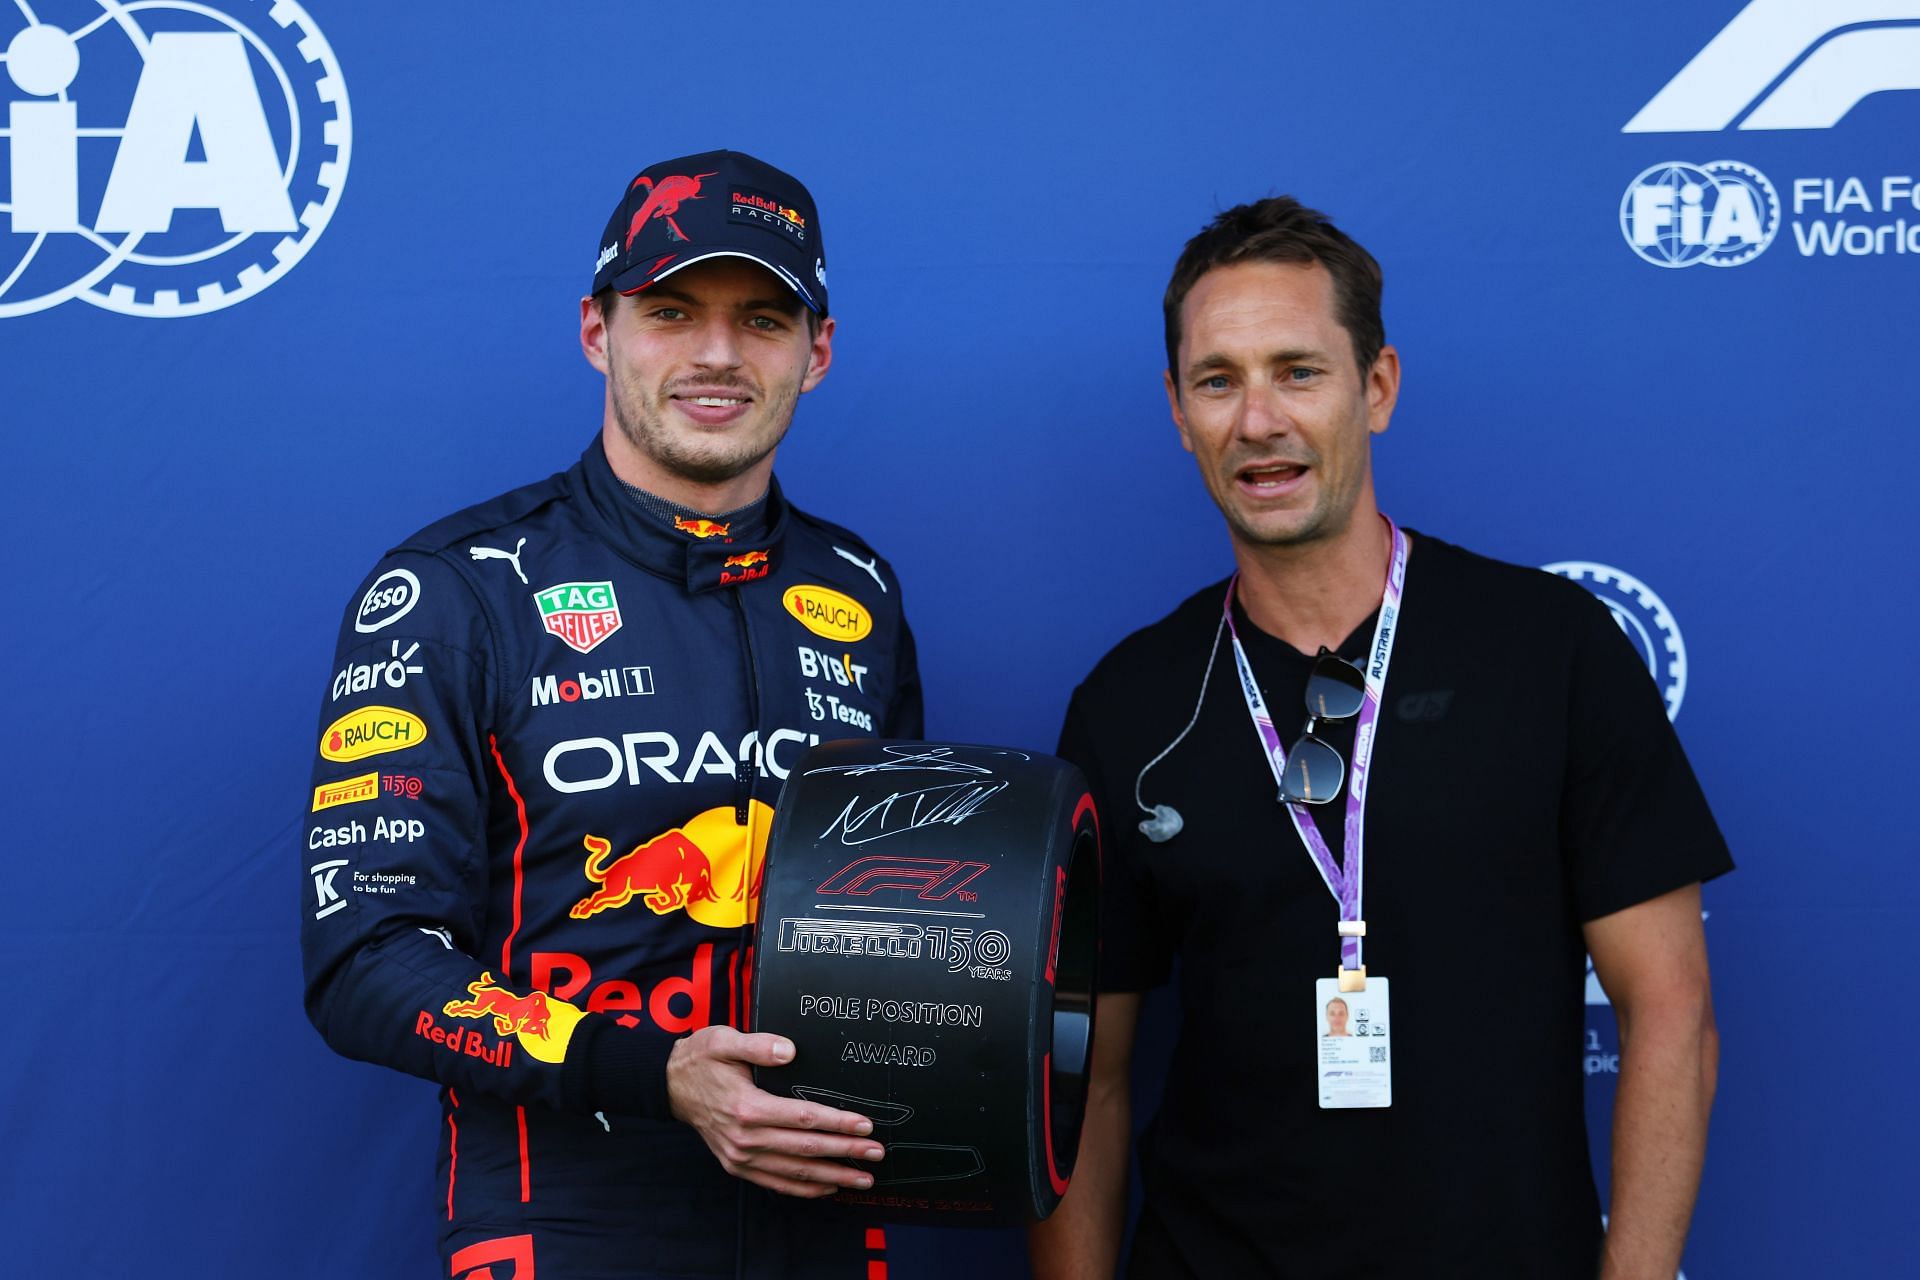 Max Verstappen scored pole position for the Austrian GP Sprint qualifying